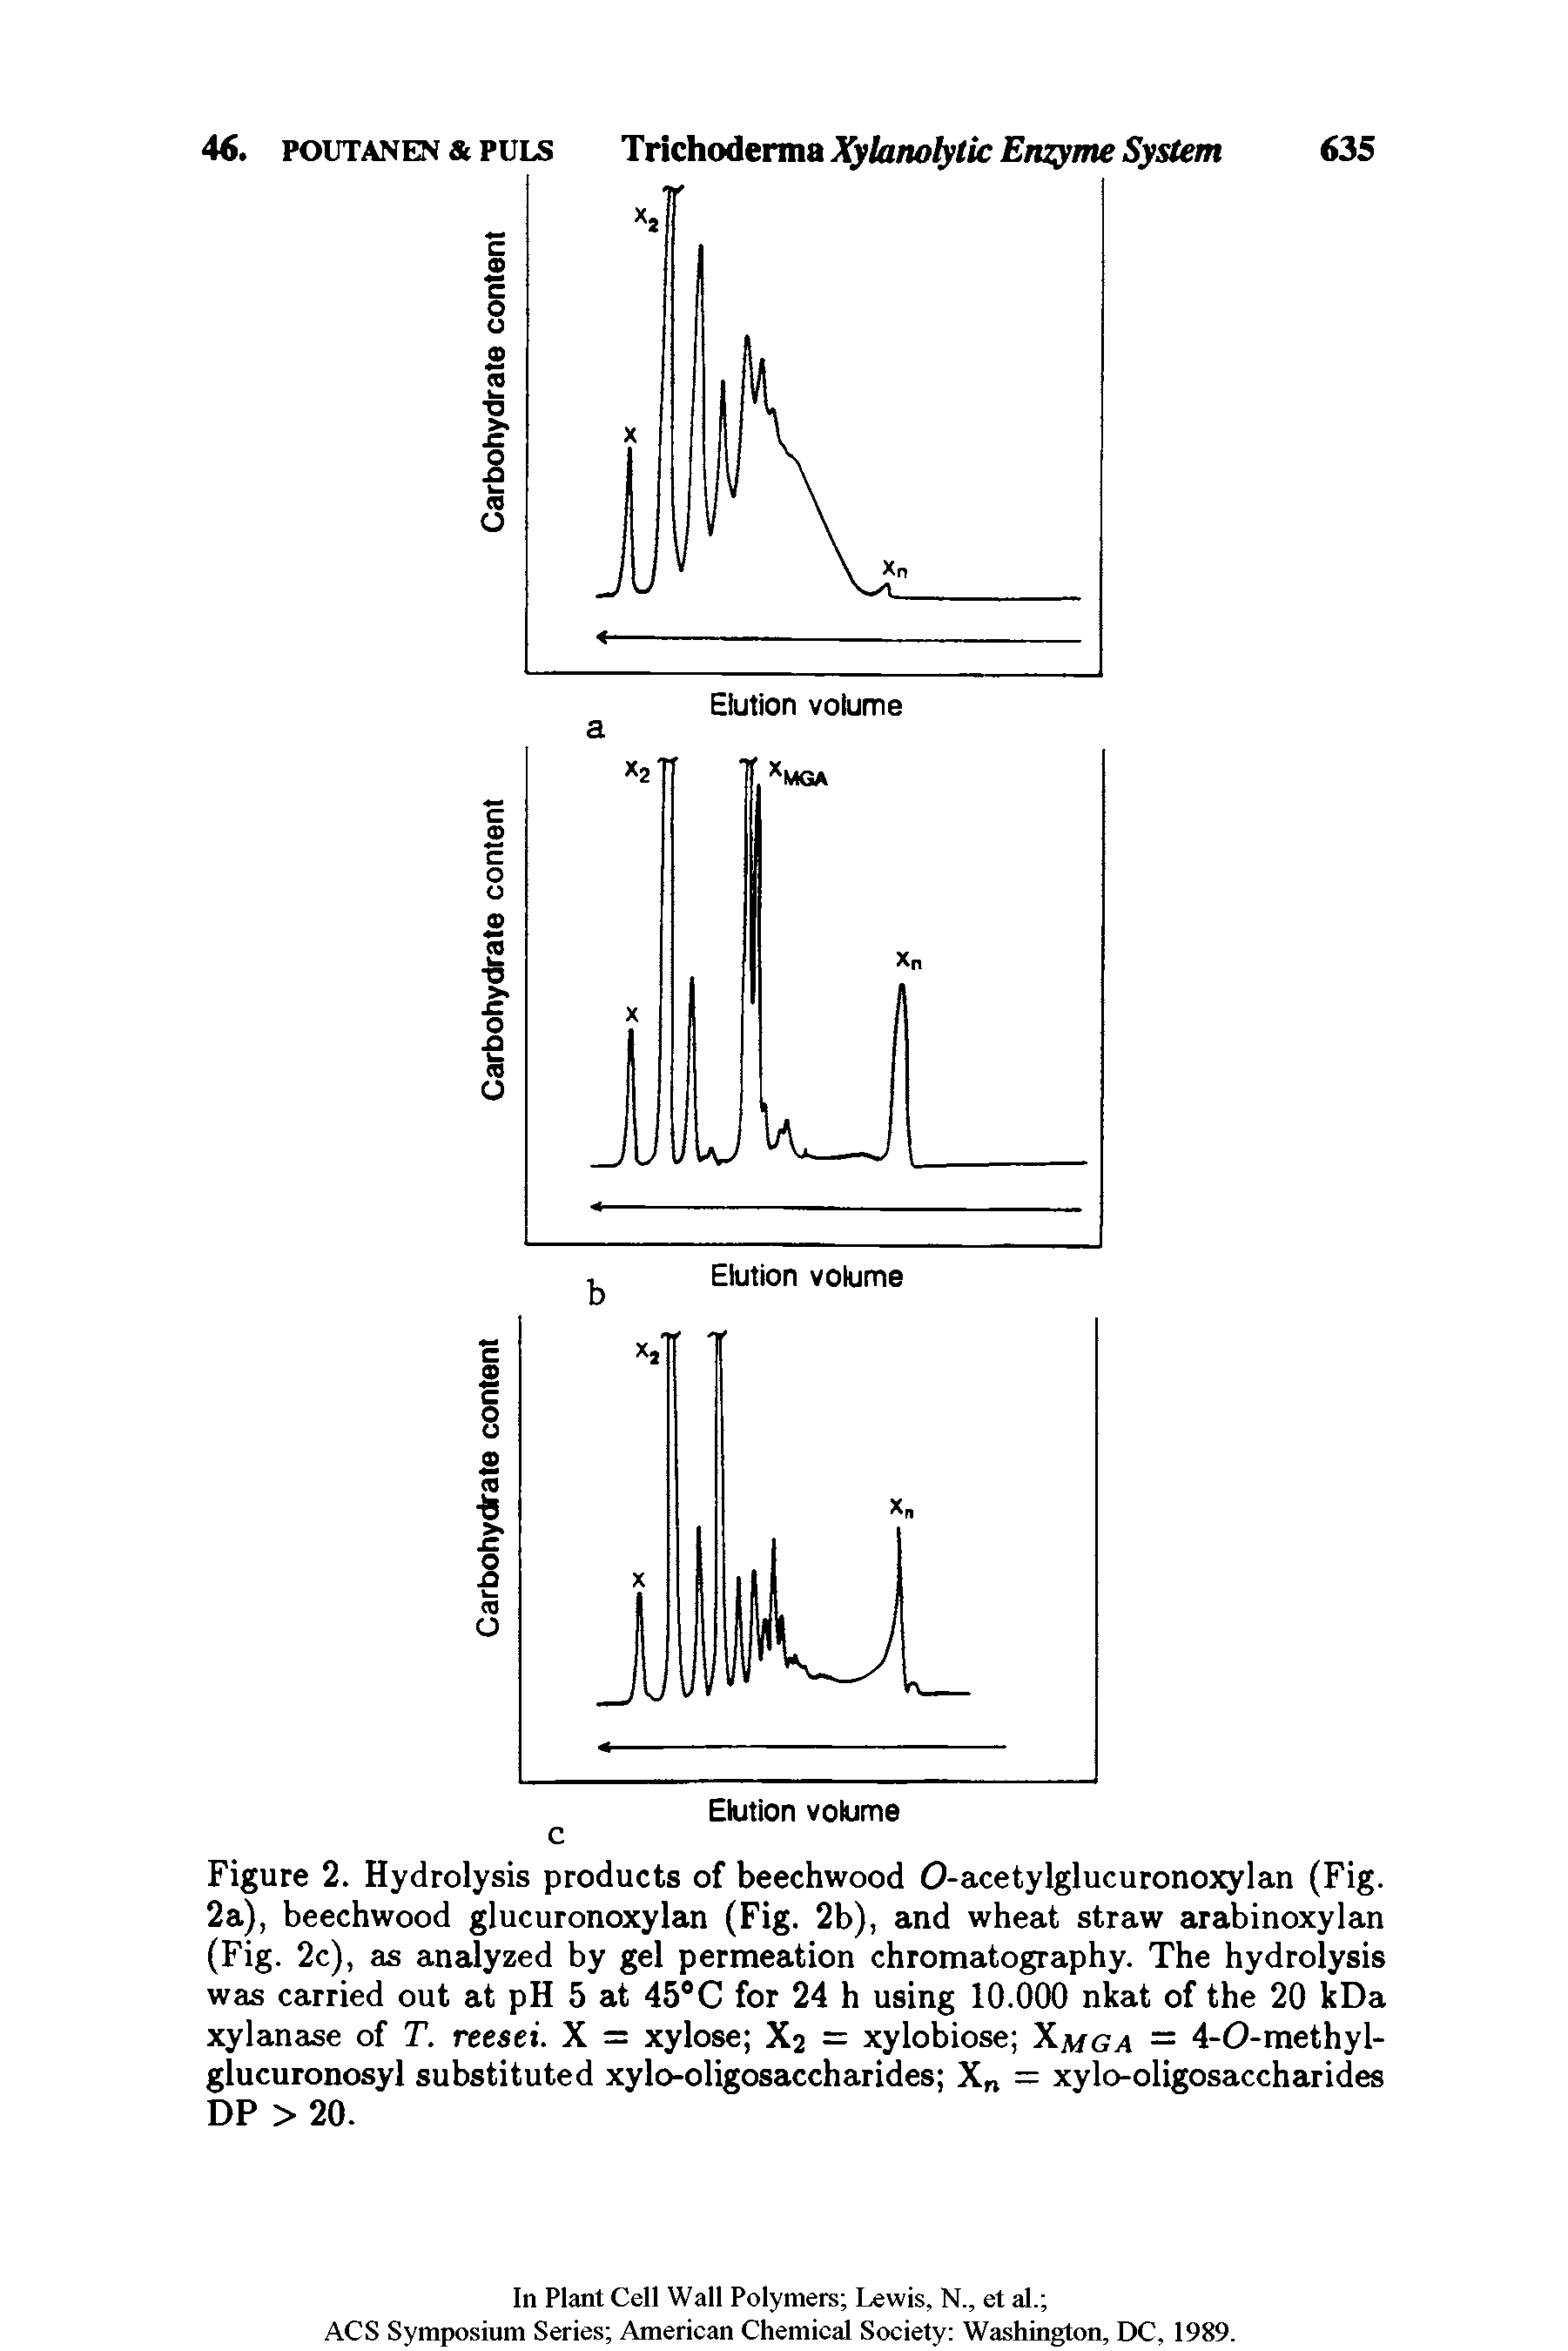 Figure 2. Hydrolysis products of beechwood O-acetylglucuronoxylan (Fig. 2a), beechwood glucuronoxylan (Fig. 2b), and wheat straw arabinoxylan (Fig. 2c), as analyzed by gel permeation chromatography. The hydrolysis was carried out at pH 5 at 45°C for 24 h using 10.000 nkat of the 20 kDa xylanase of T. reesei. X = xylose X2 = xylobiose Xmga — 4-O-methyl-glucuronosyl substituted xylo-oligosaccharides X = xylo-oligosaccharides DP > 20.